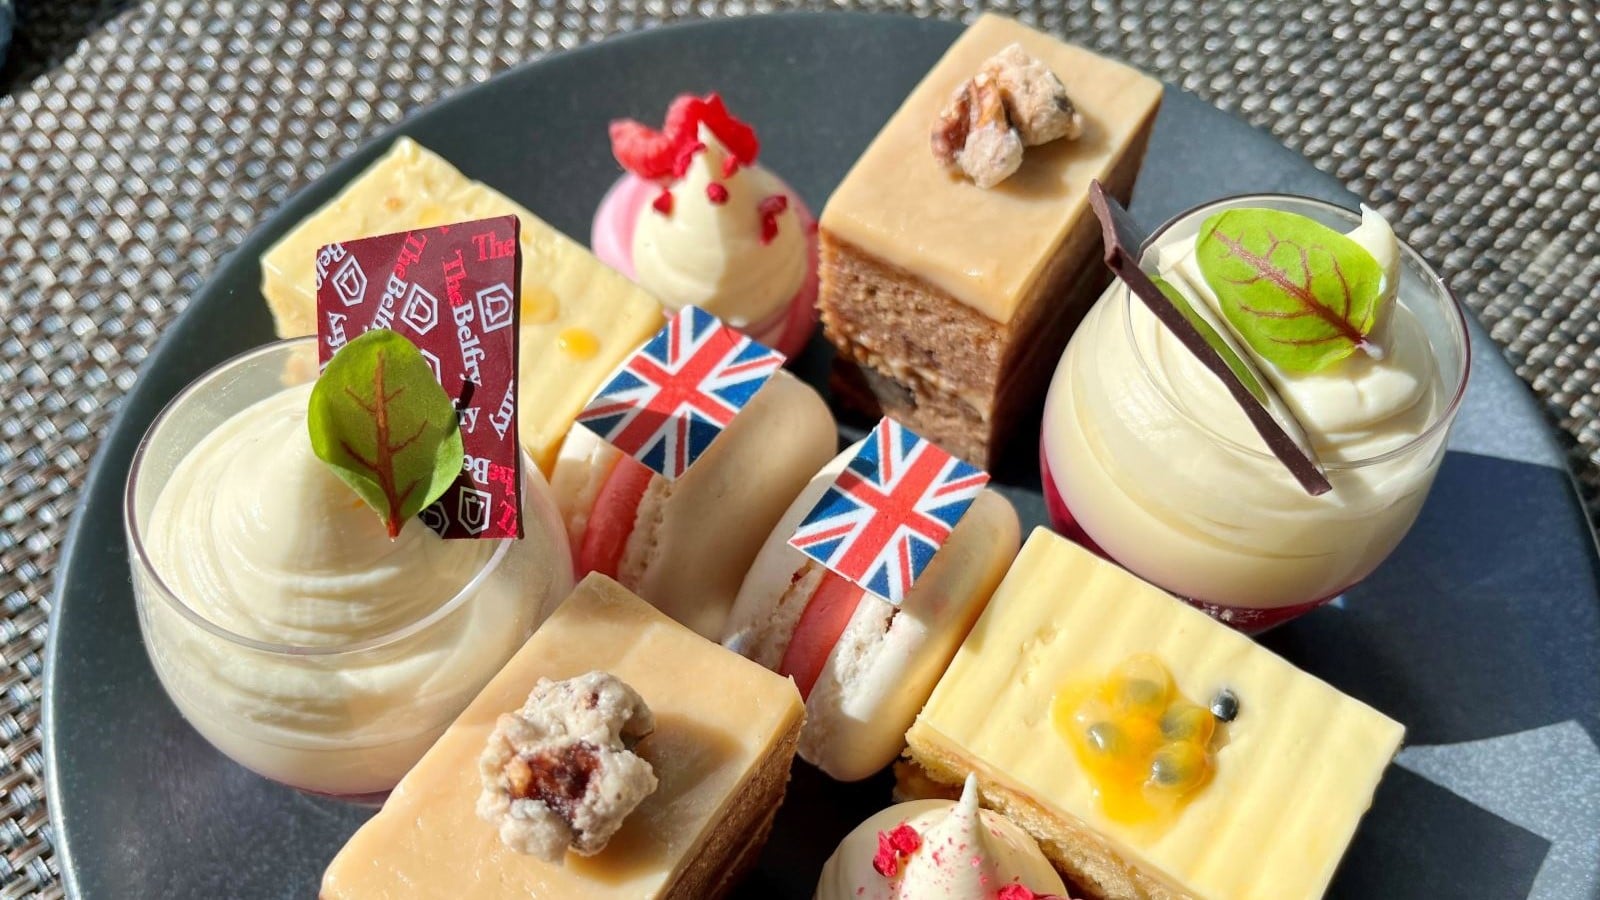 Afternoon tea selection of cakes from the Belfry for the Kin's Coronation near Birmingham